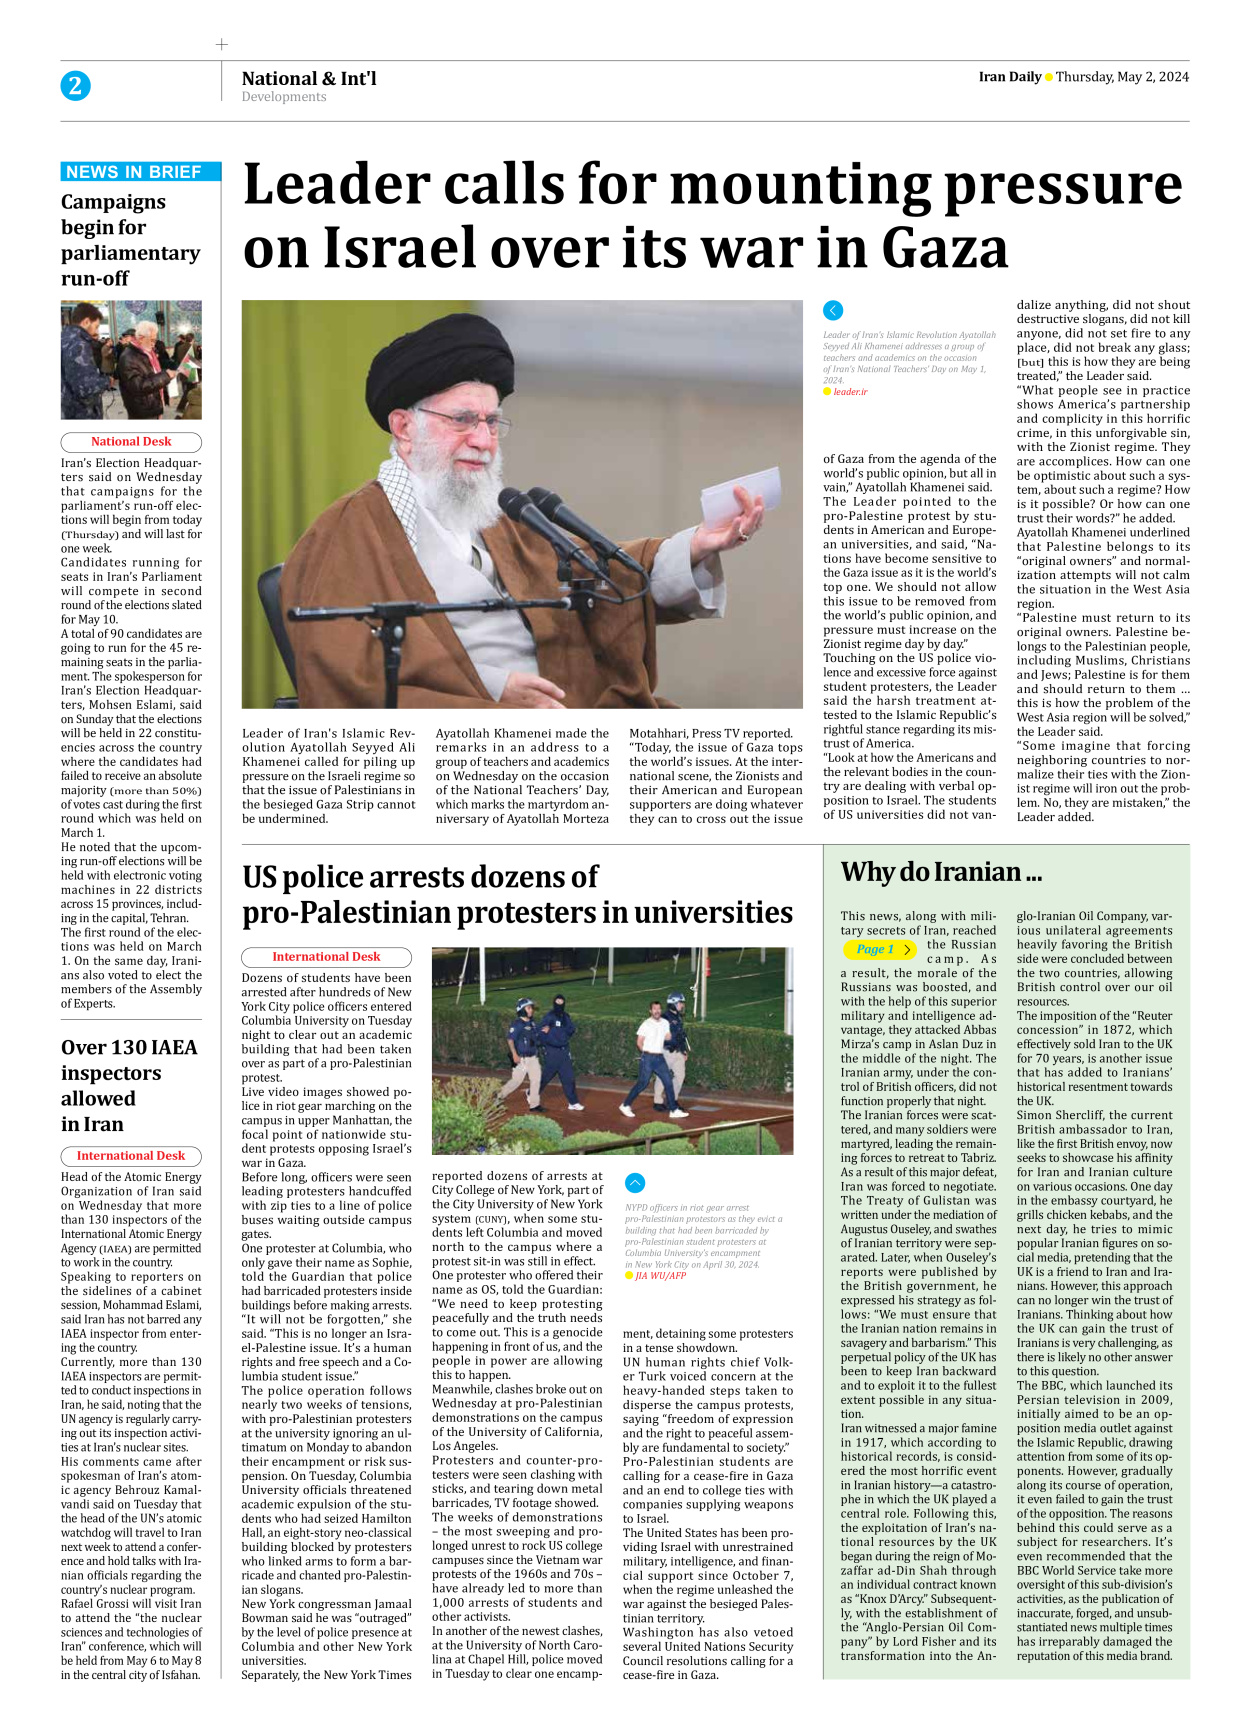 Iran Daily - Number Seven Thousand Five Hundred and Forty Eight - 02 May 2024 - Page 2